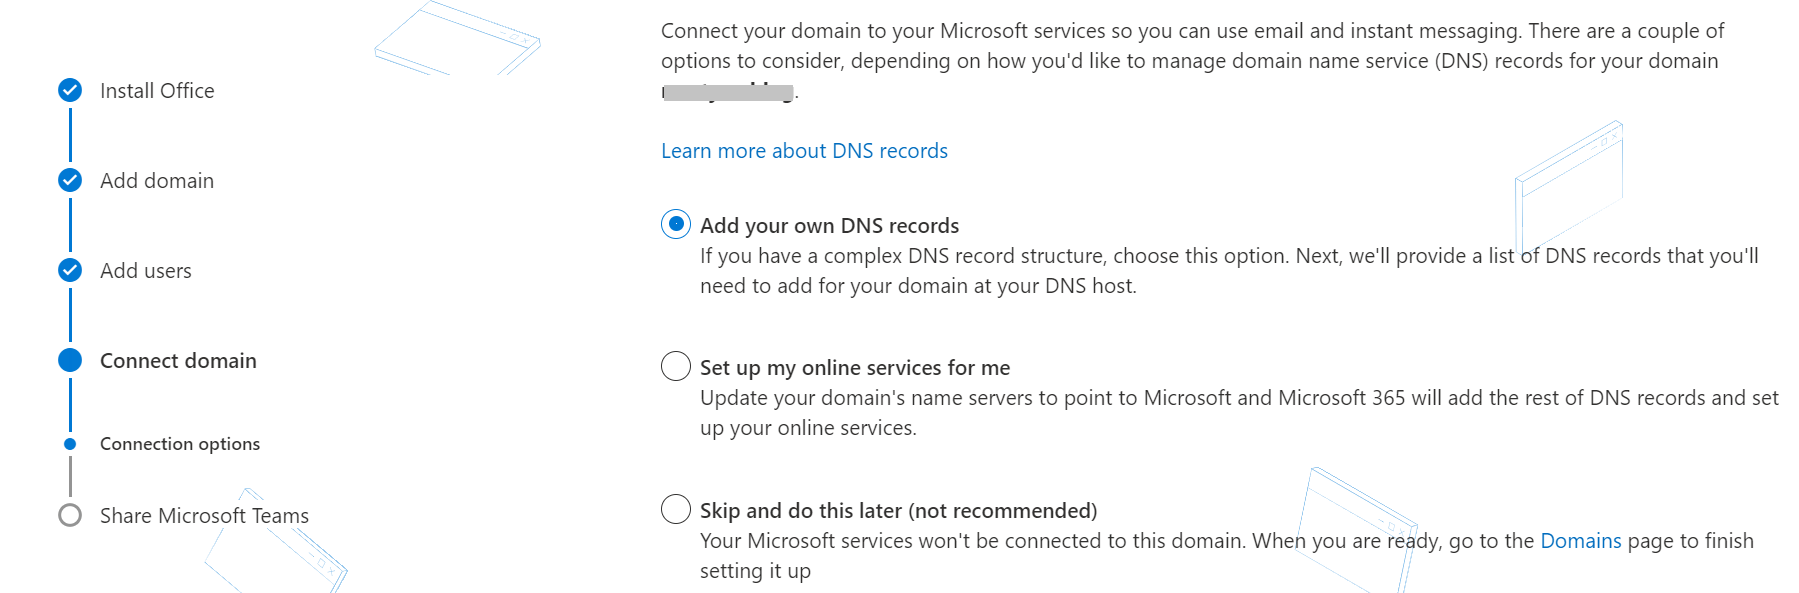 do i have to setup a microsoft account for office 365